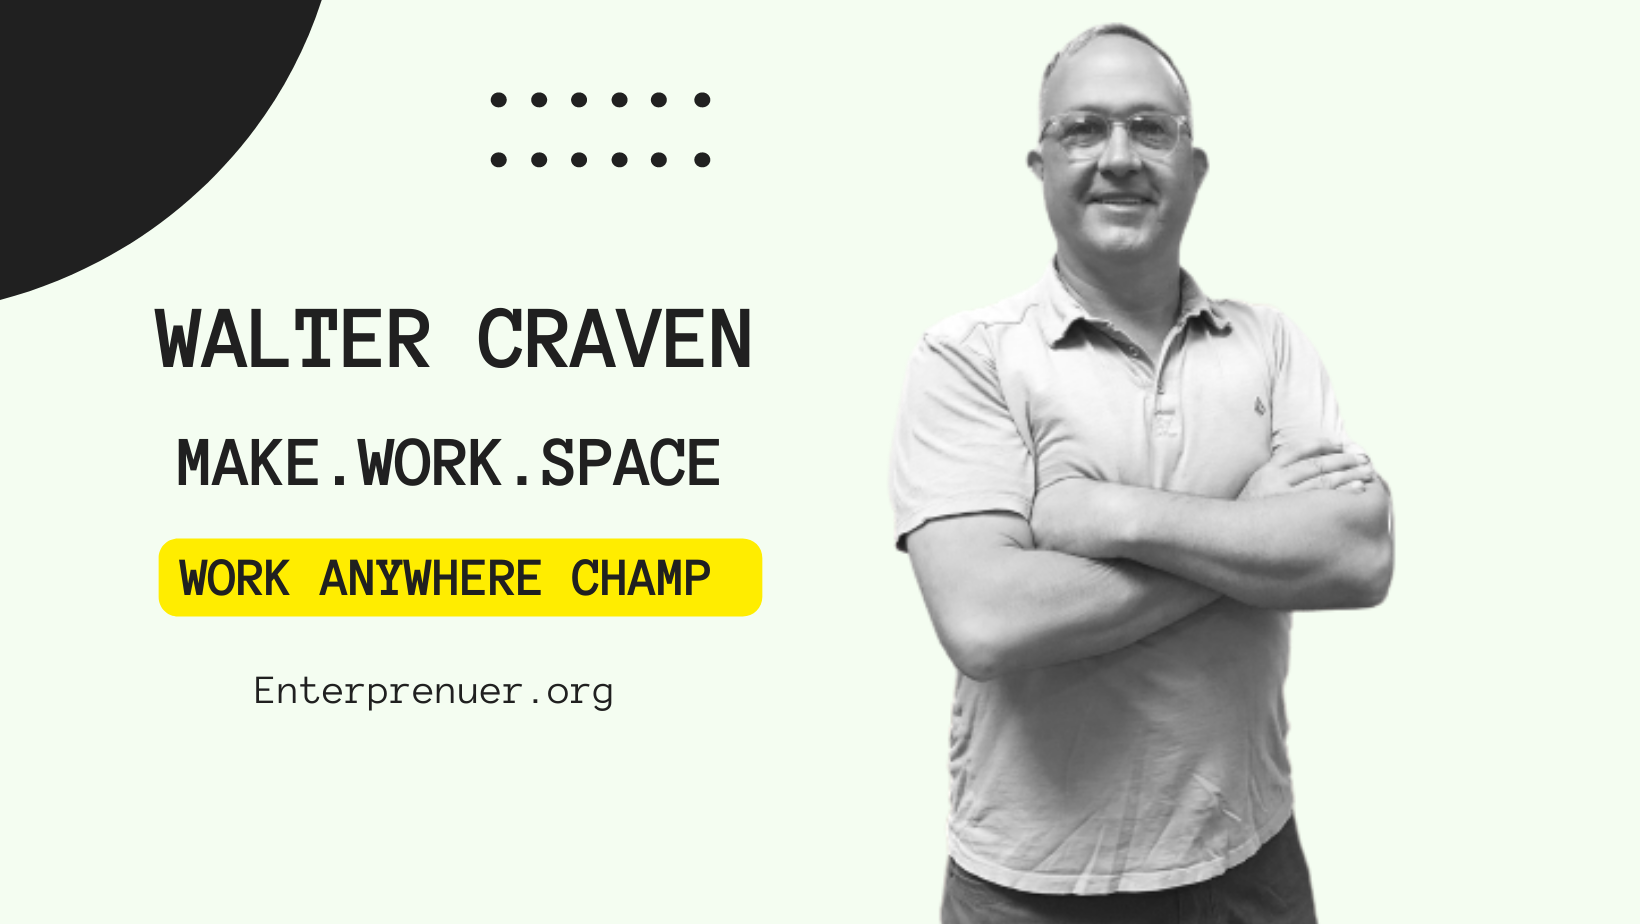 Walter Craven, Founder of Make.Work.Space